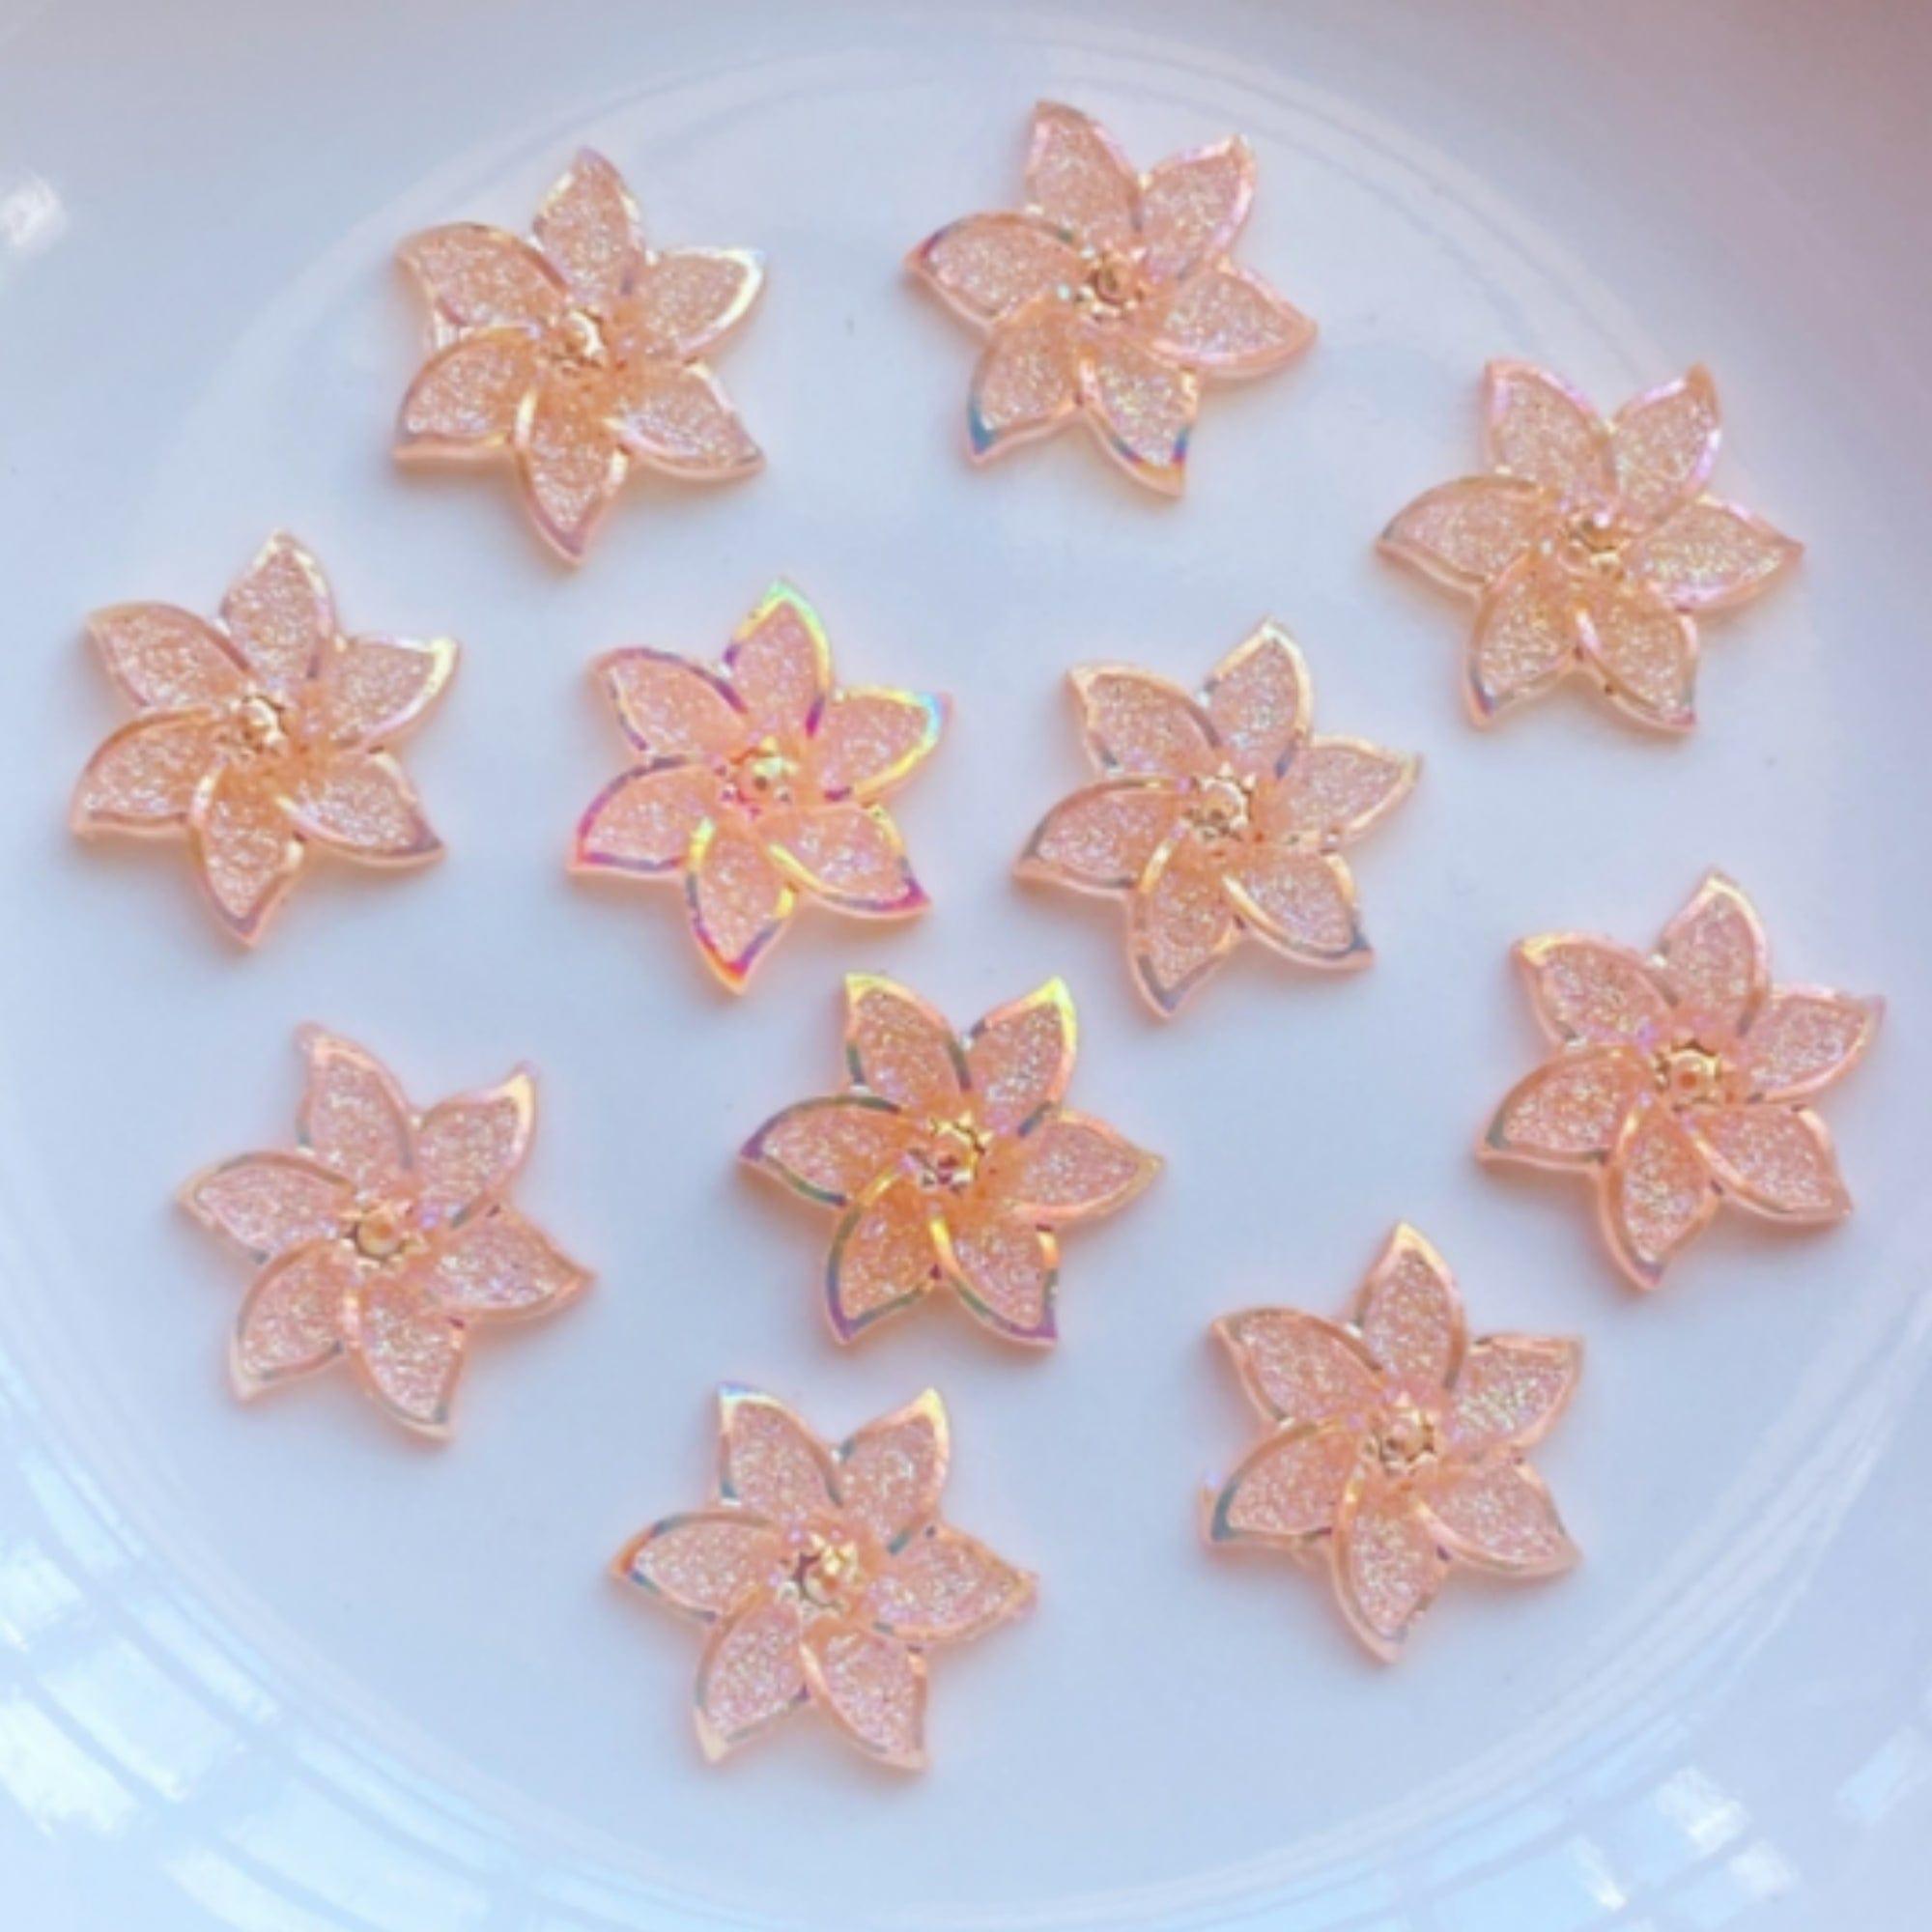 Iridescent Peach Mini Flower Resin 1/2 inch Flatback Embellishments by SSC Designs - 10 pieces